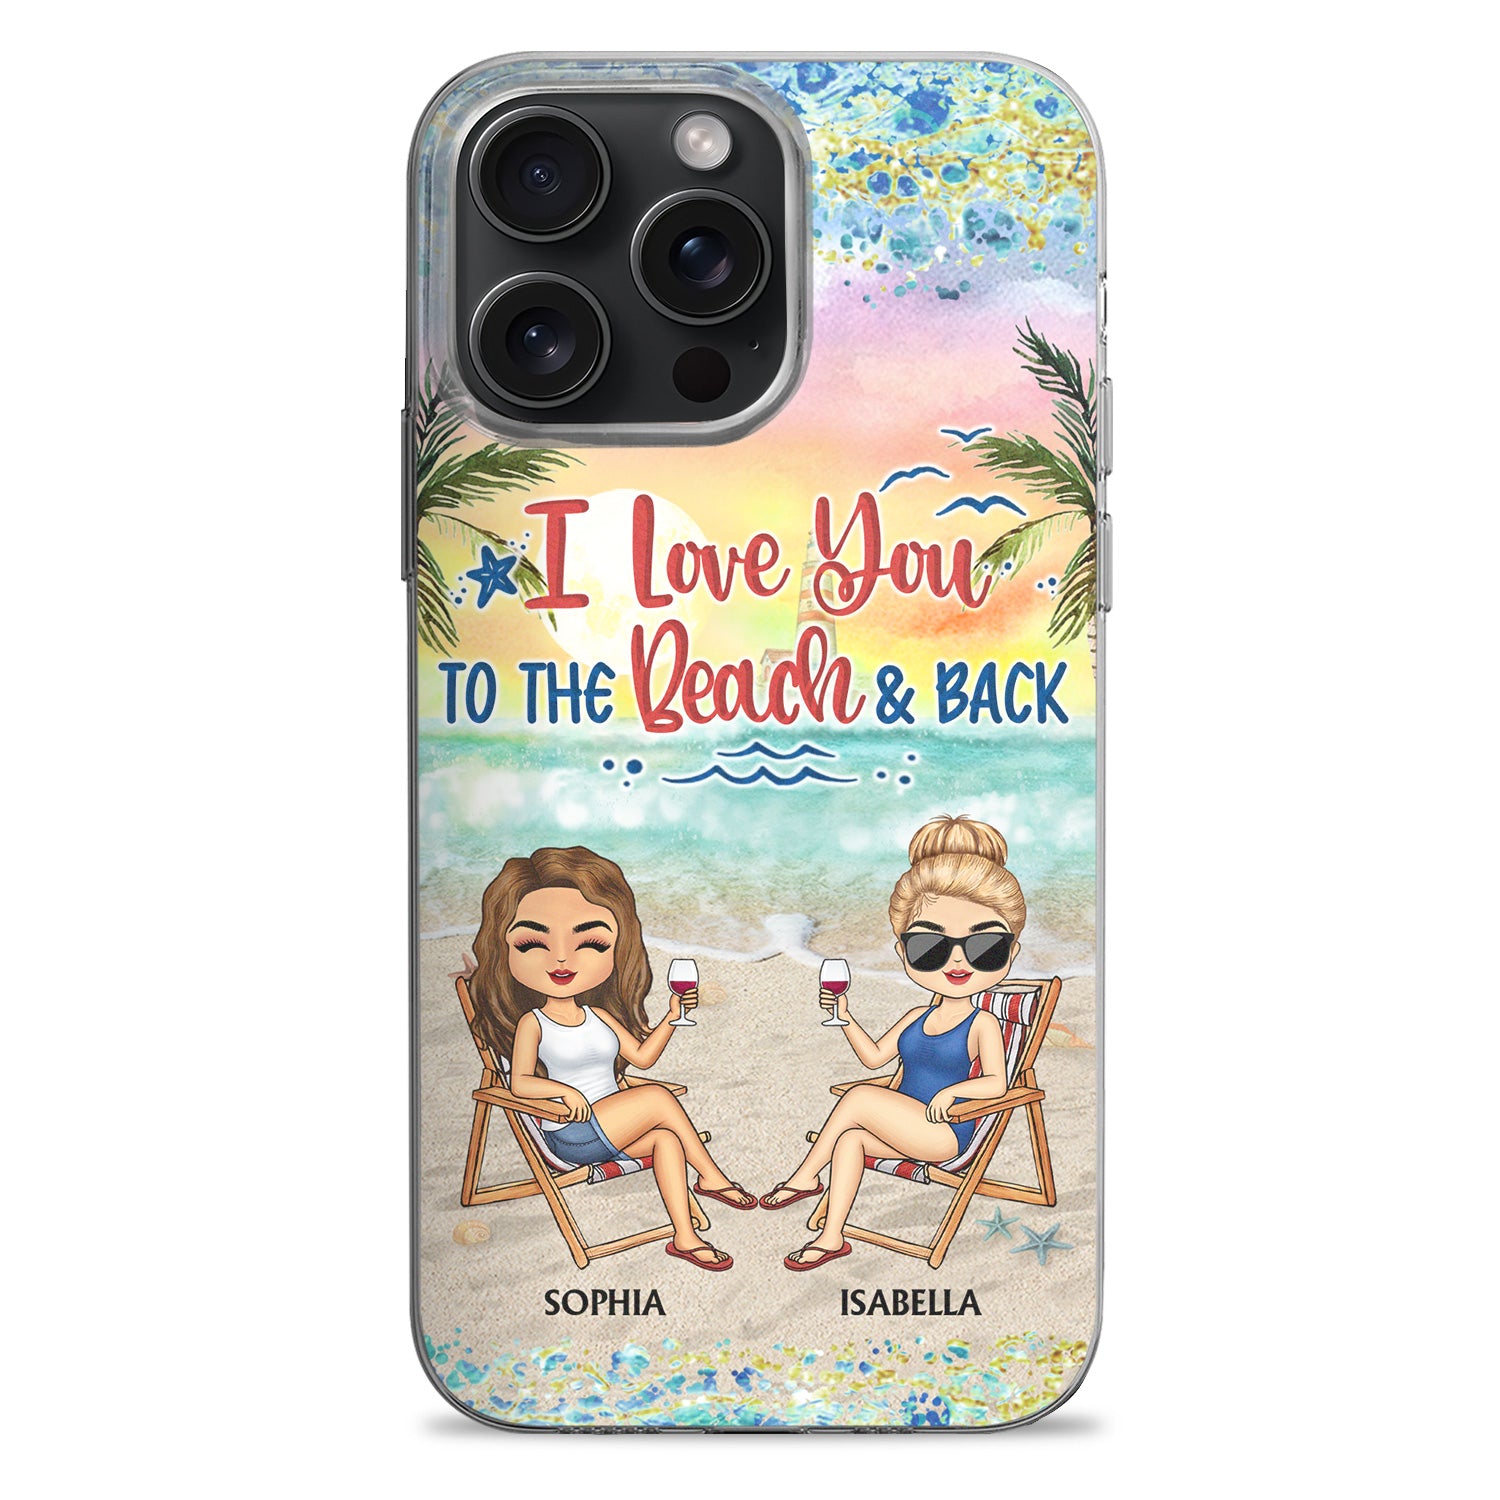 I Love You To The Beach And Back - Gift For Best Friends, Besties, Traveling Lovers - Personalized Clear Phone Case